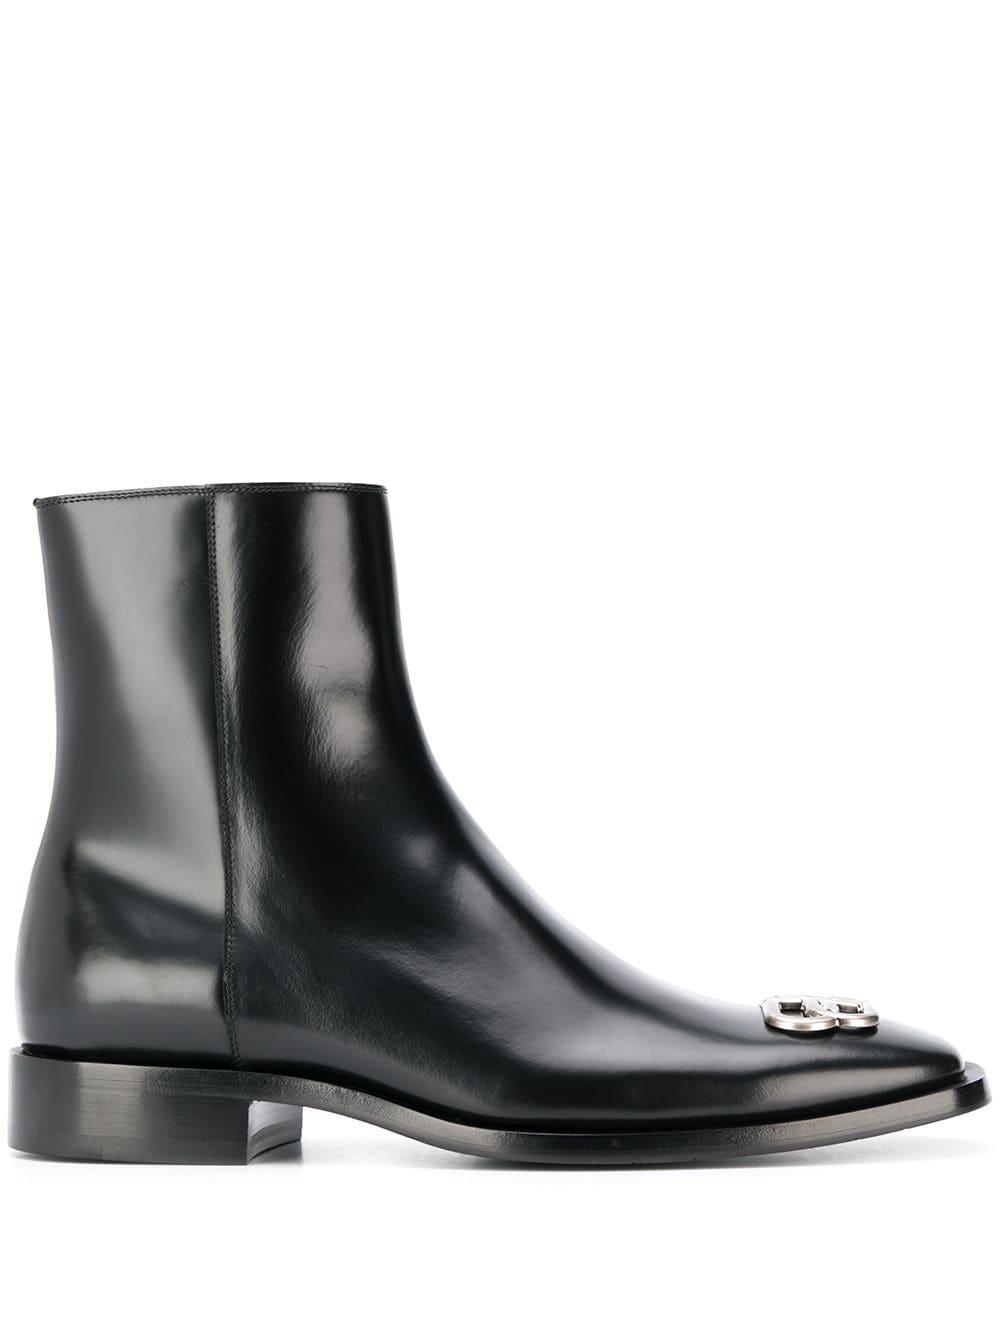 Balenciaga Smooth Leather Bb Boots in Black for Men | Lyst